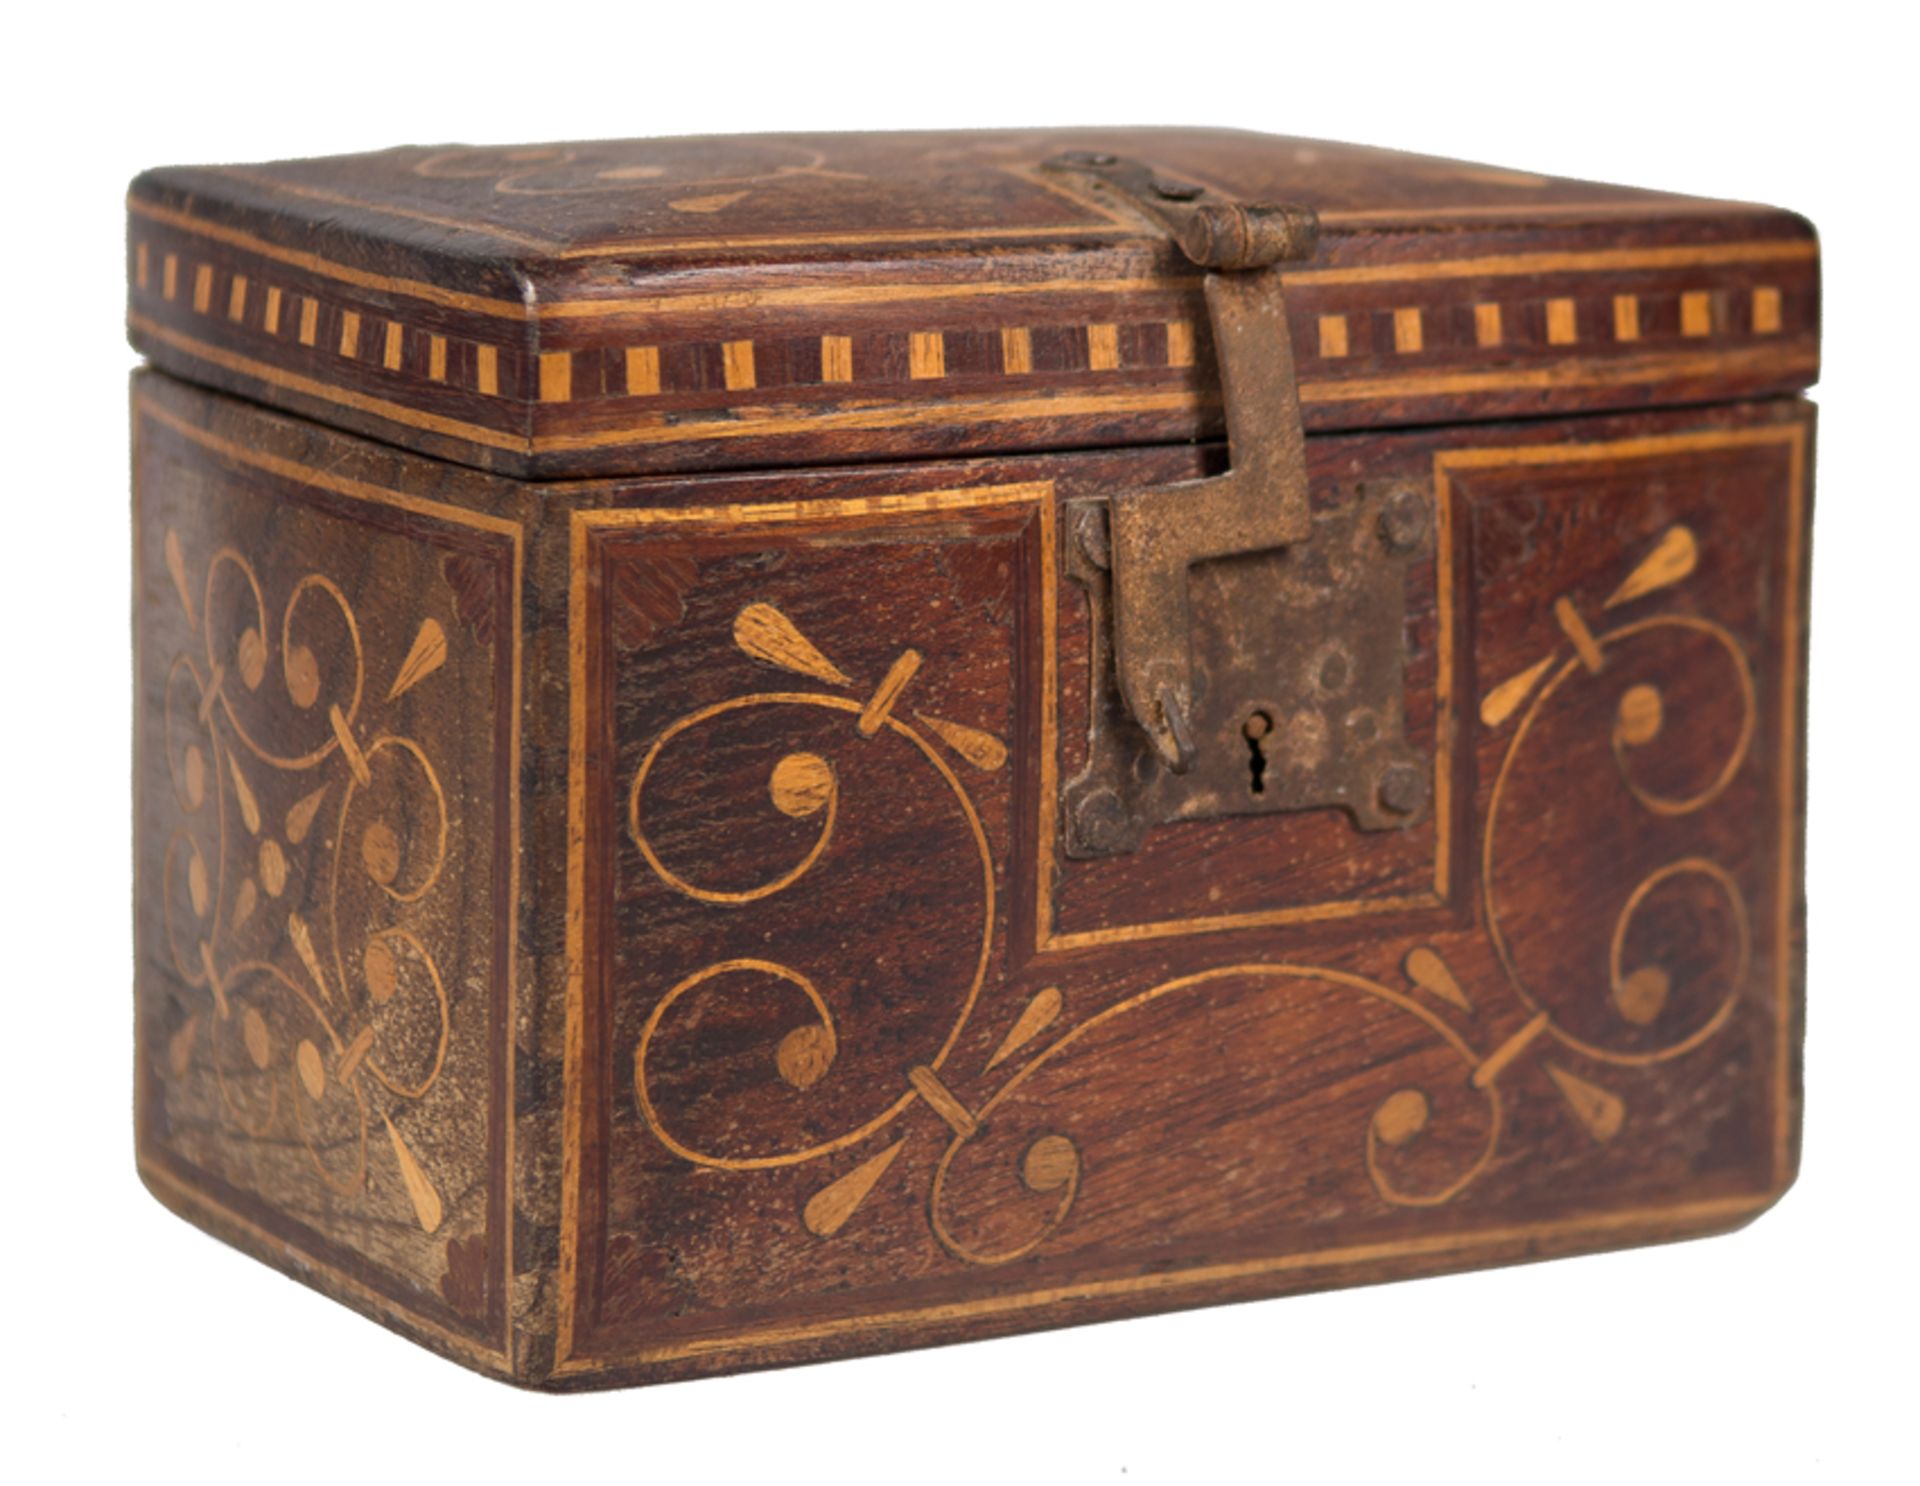 Small wooden chest with boxwood inlay and ironwork. Spain or New Spain. 18th century.